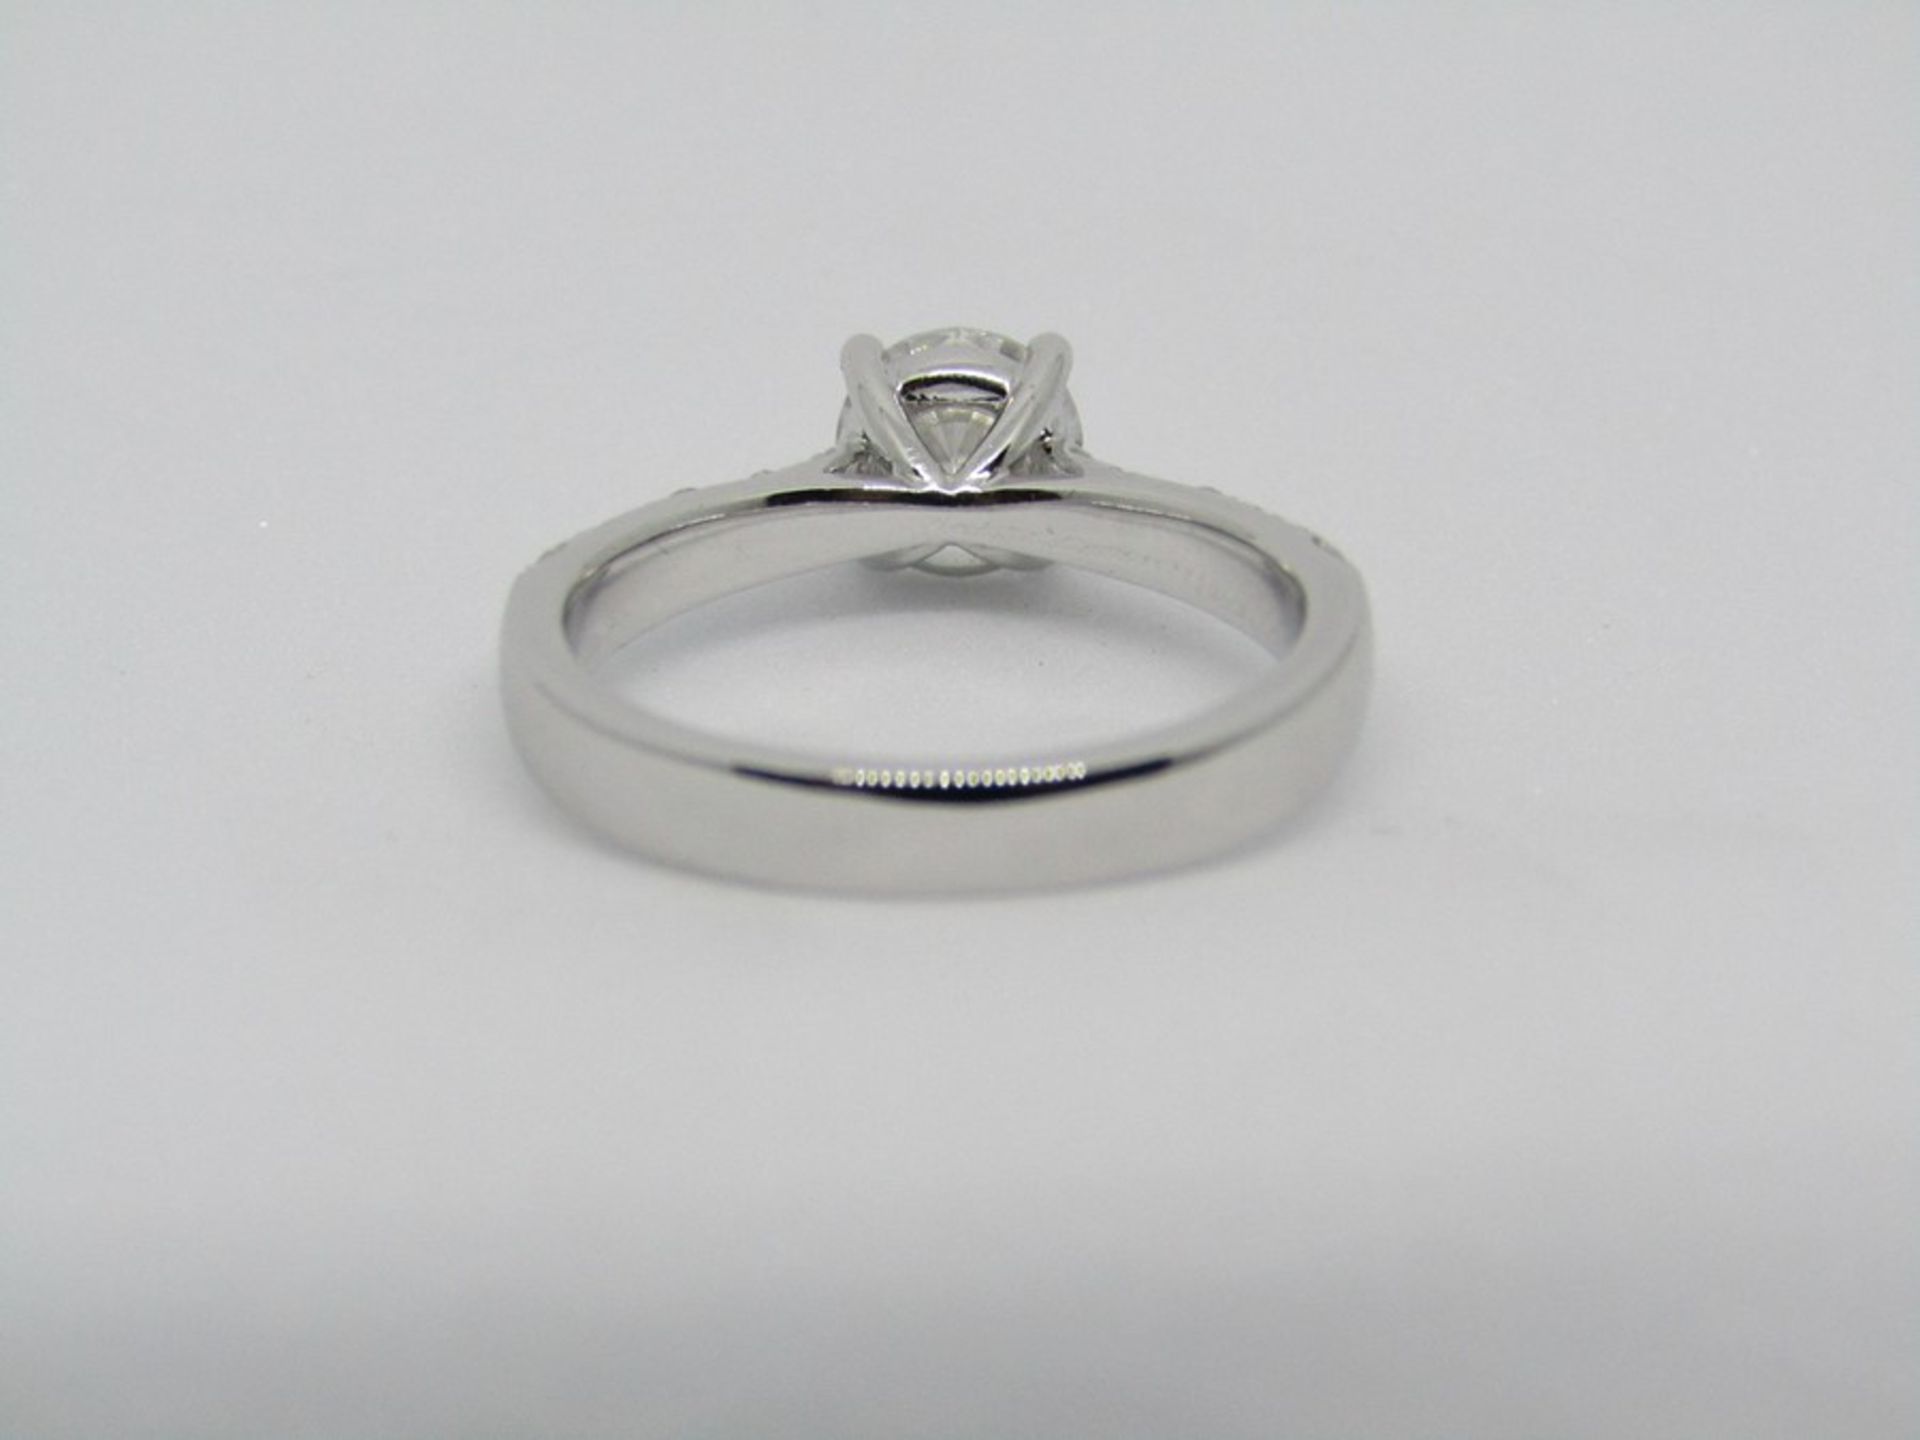 Stunning 1ct Moissanite Stone Engagement or Special Occasion Ring Set in 18ct White Gold RRP £1495 - Image 3 of 4